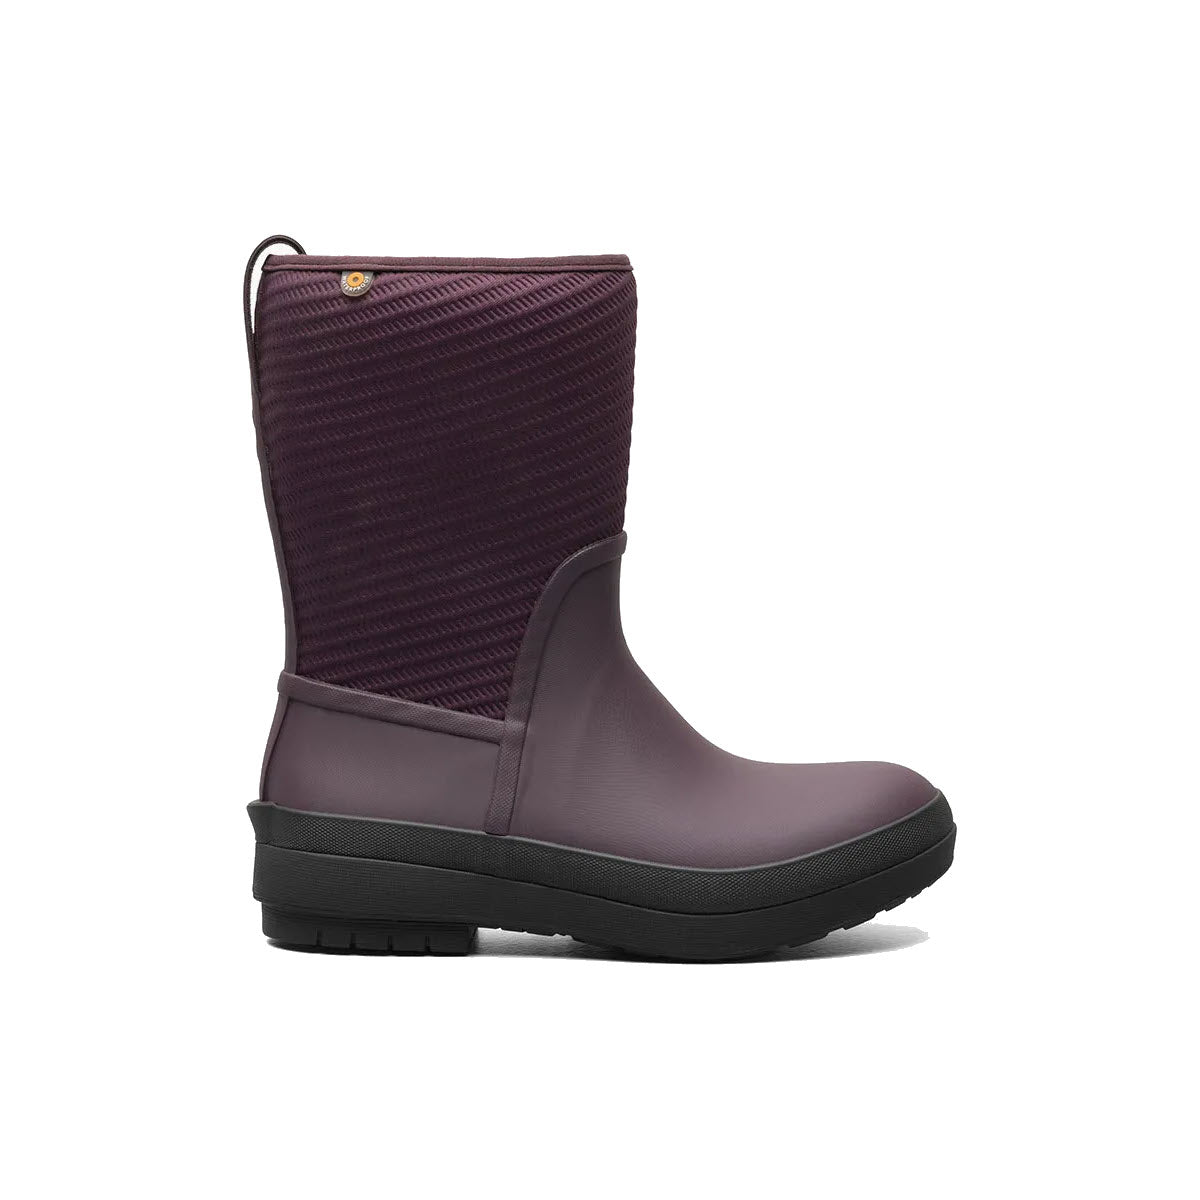 A single Bogs Crandall II Mid Zip Wine women&#39;s snow boot with a quilted upper section and a smooth lower section, displayed on a white background.